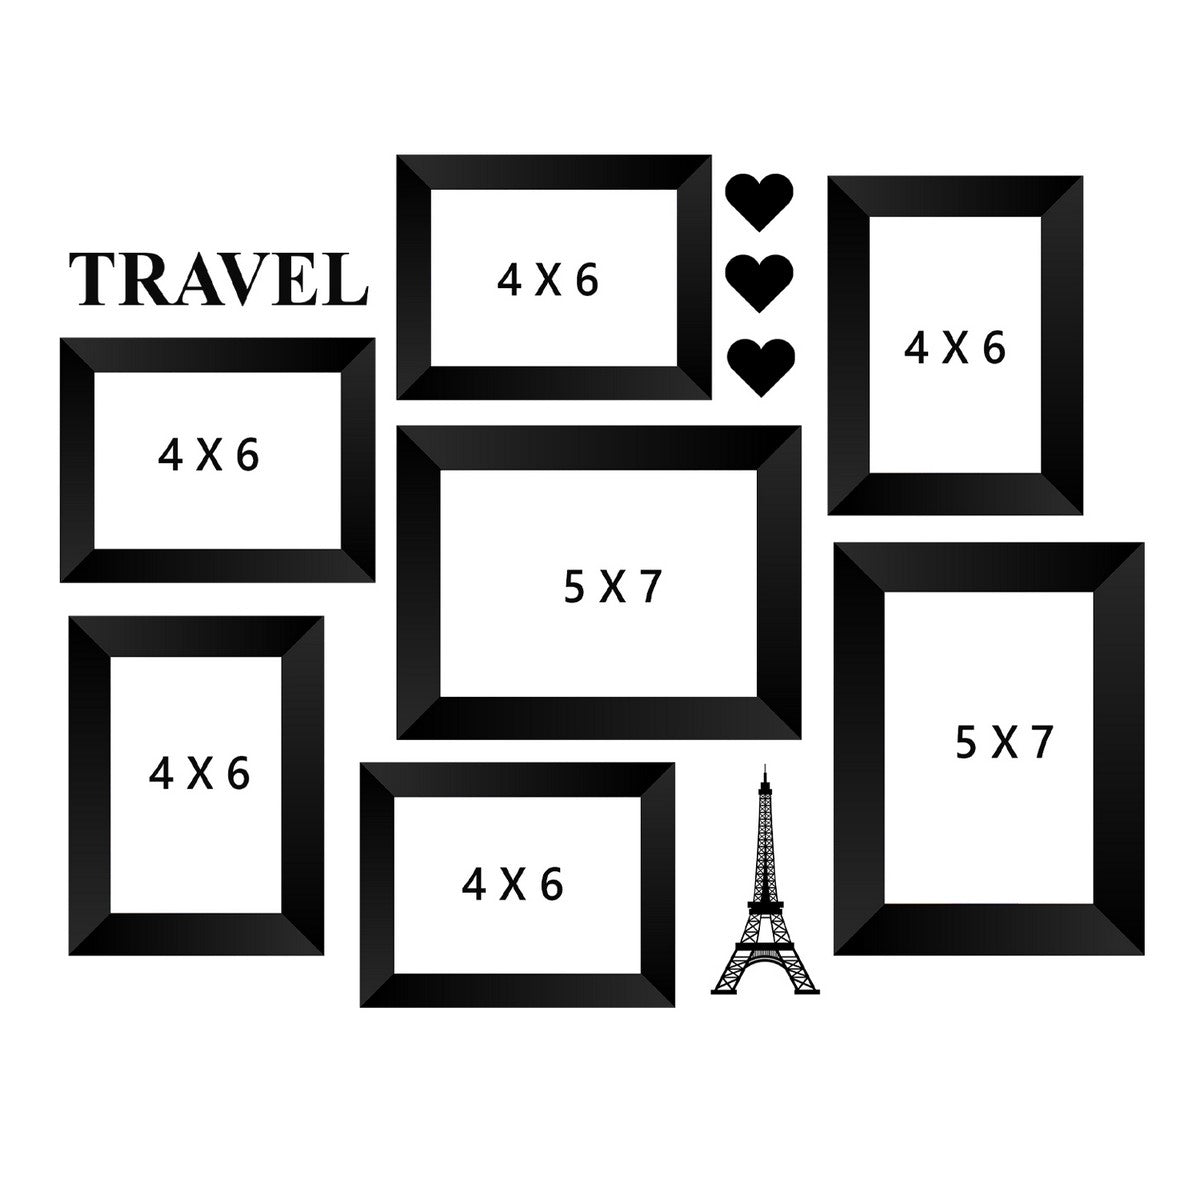 Memory Wall Collage Photo Frame - Set of 7 Photo Frames for 5 Photos of 4"x6", 2 Photos of 5"x7", 1 Piece of TRAVEL, 1 Piece of EIFFEL TOWER, 3 Pieces of HEARTS 3